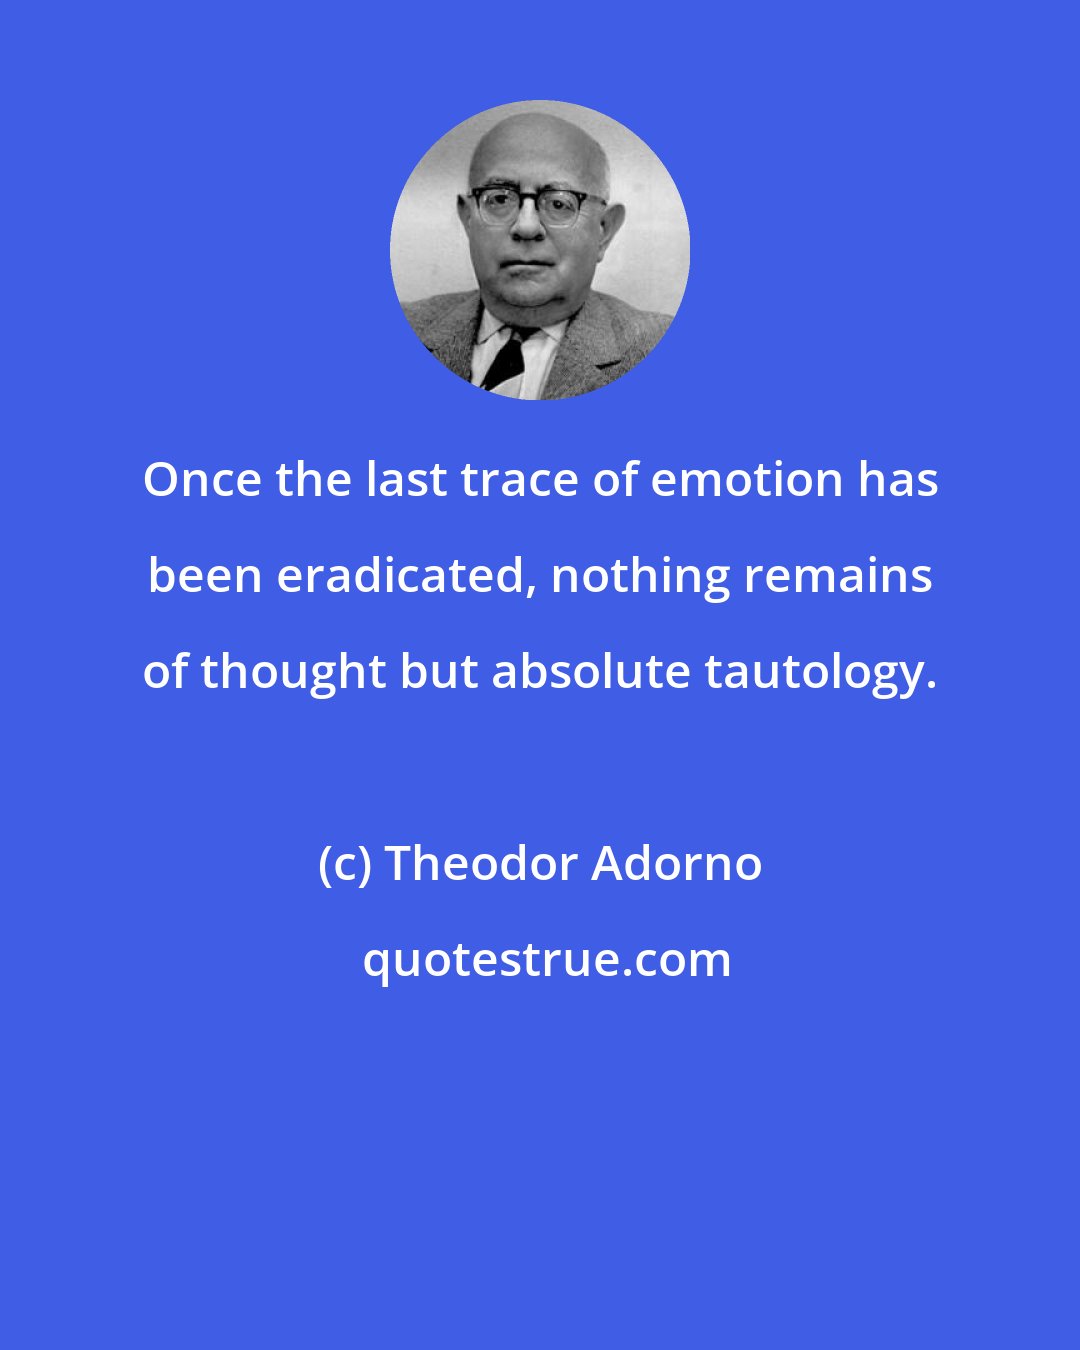 Theodor Adorno: Once the last trace of emotion has been eradicated, nothing remains of thought but absolute tautology.